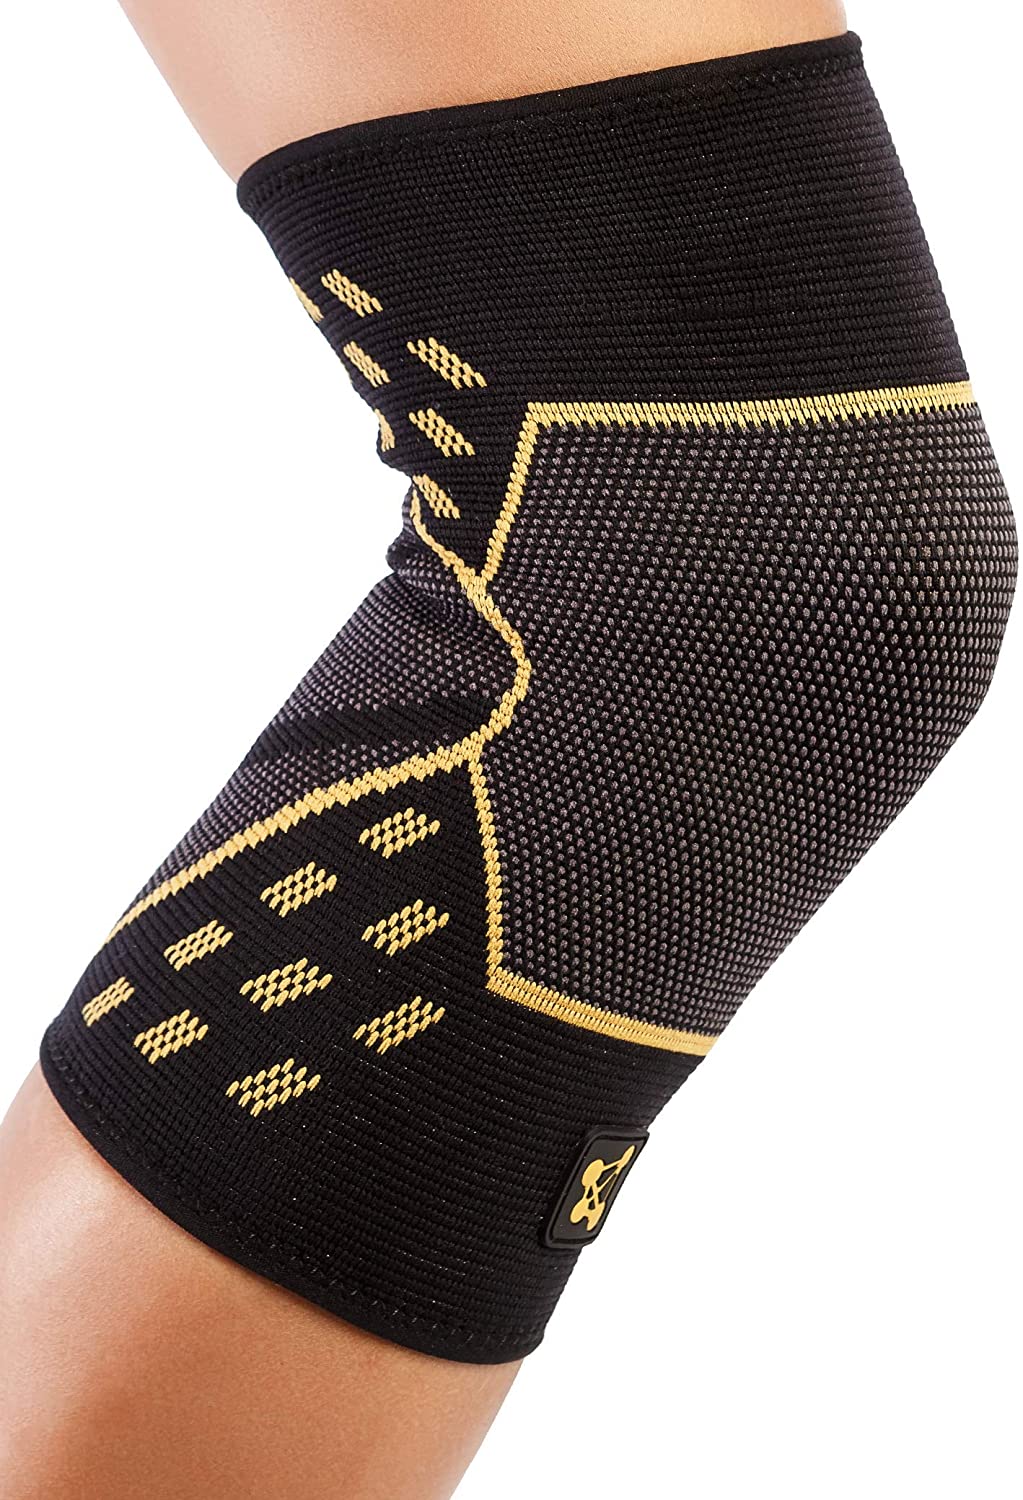 Review of CopperJoint Knee Compression Sleeve PRO - Copper-Infused